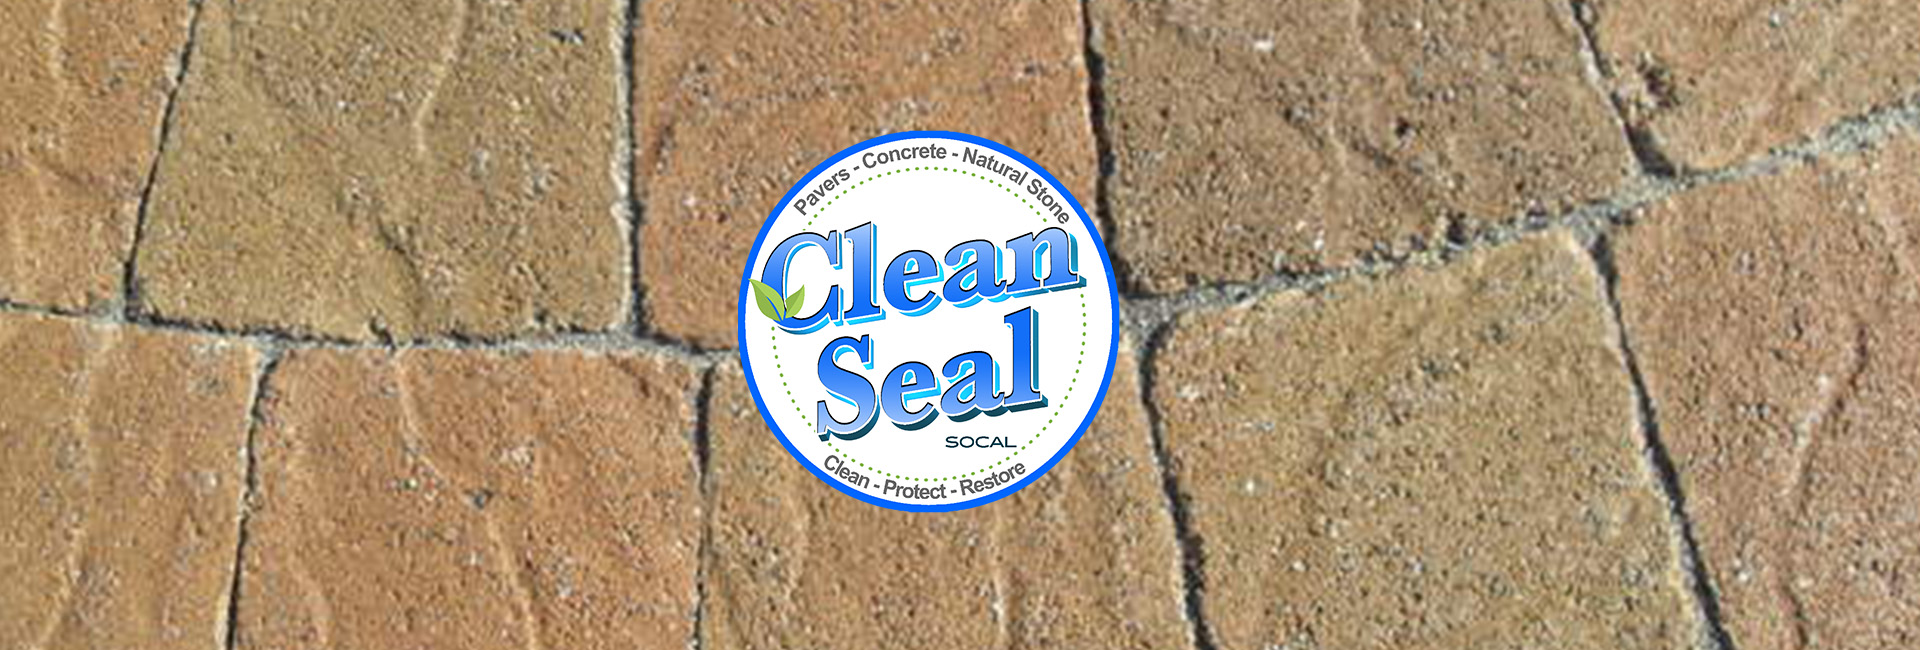 About Clean Seal Socal